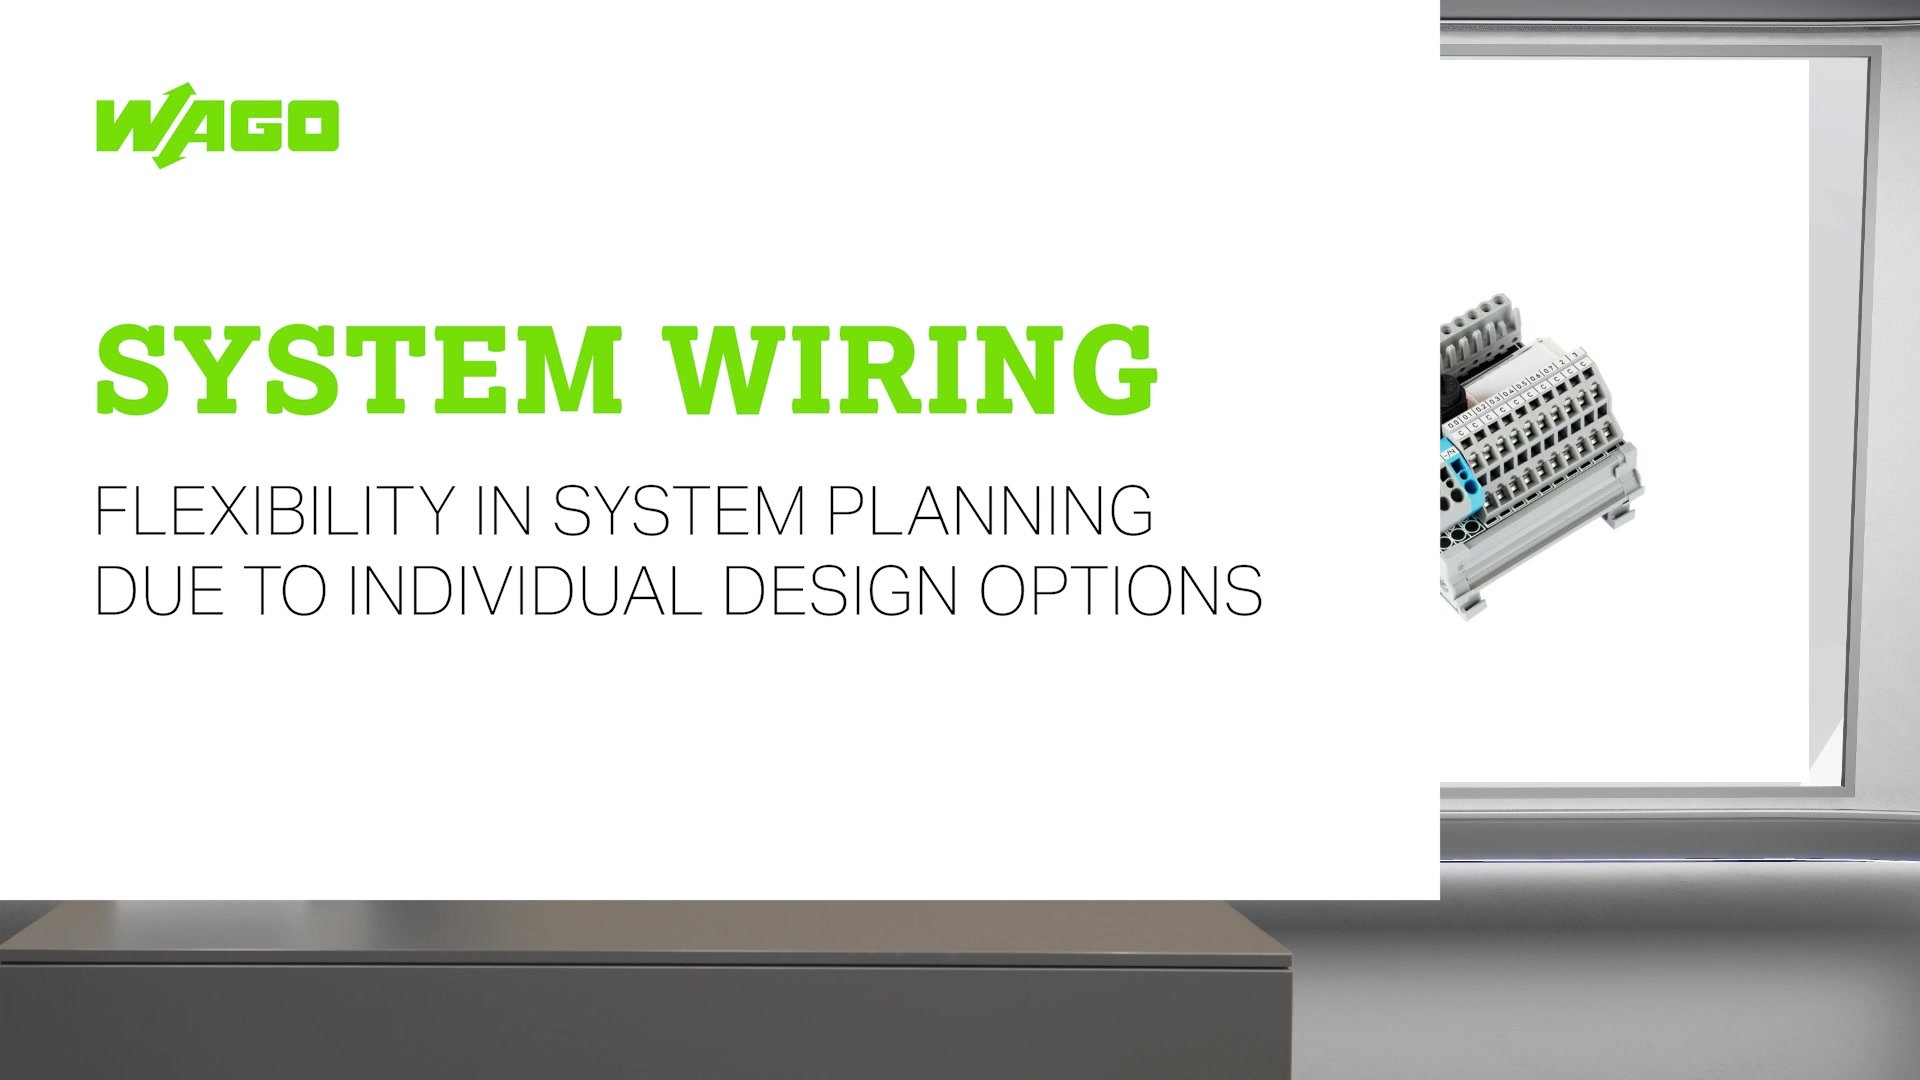 Flexibility in system planning due to individual design options